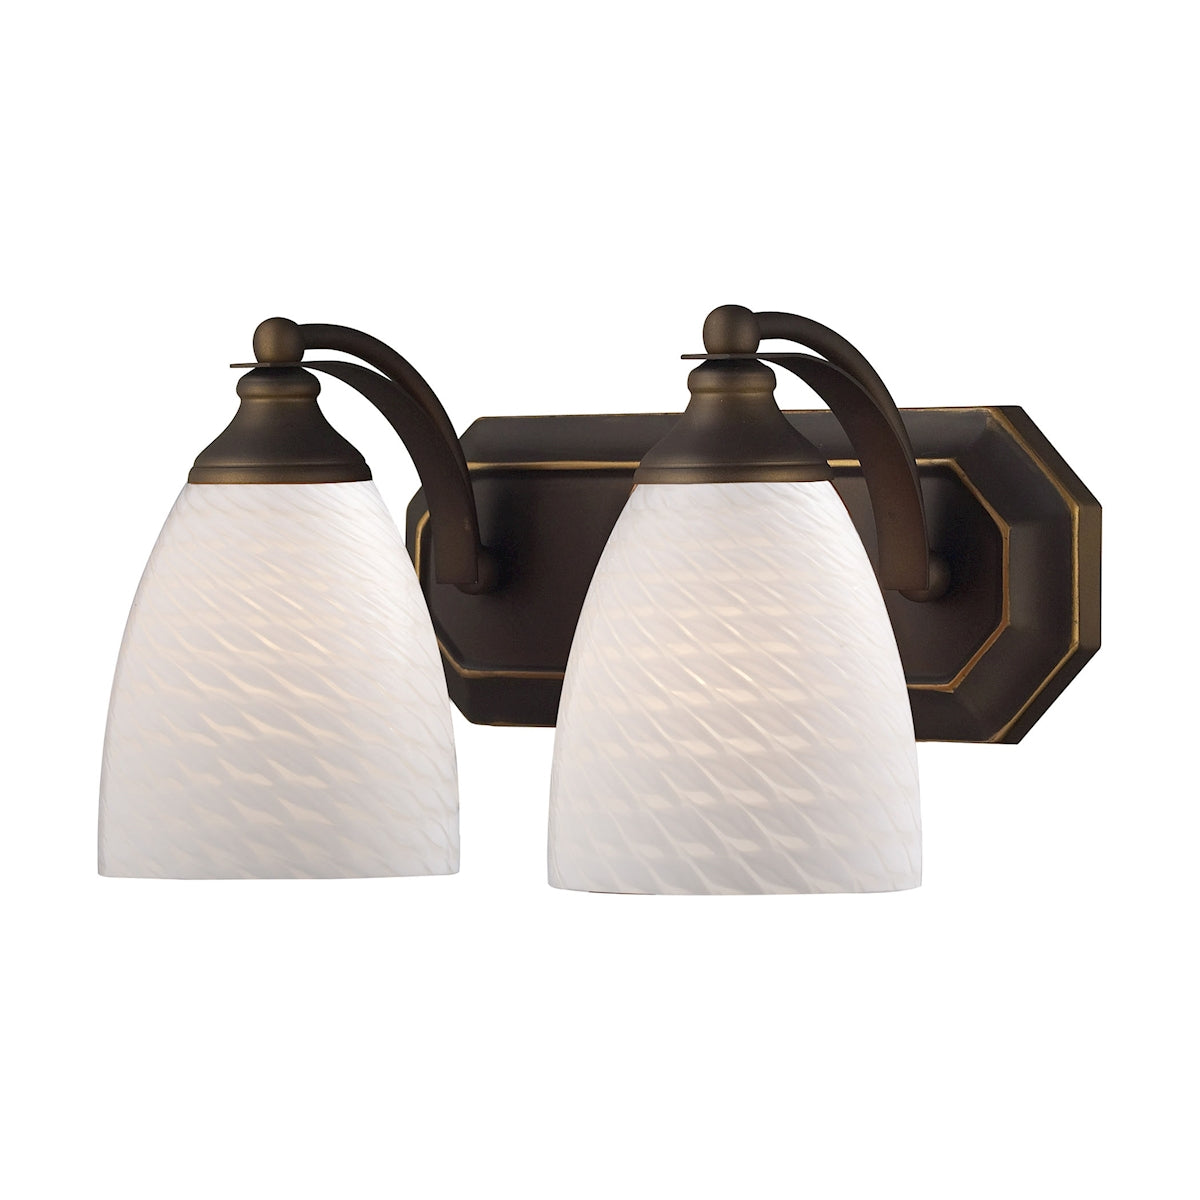 ELK Lighting 570-2B-WS Mix-N-Match Vanity 2-Light Wall Lamp in Aged Bronze with White Swirl Glass